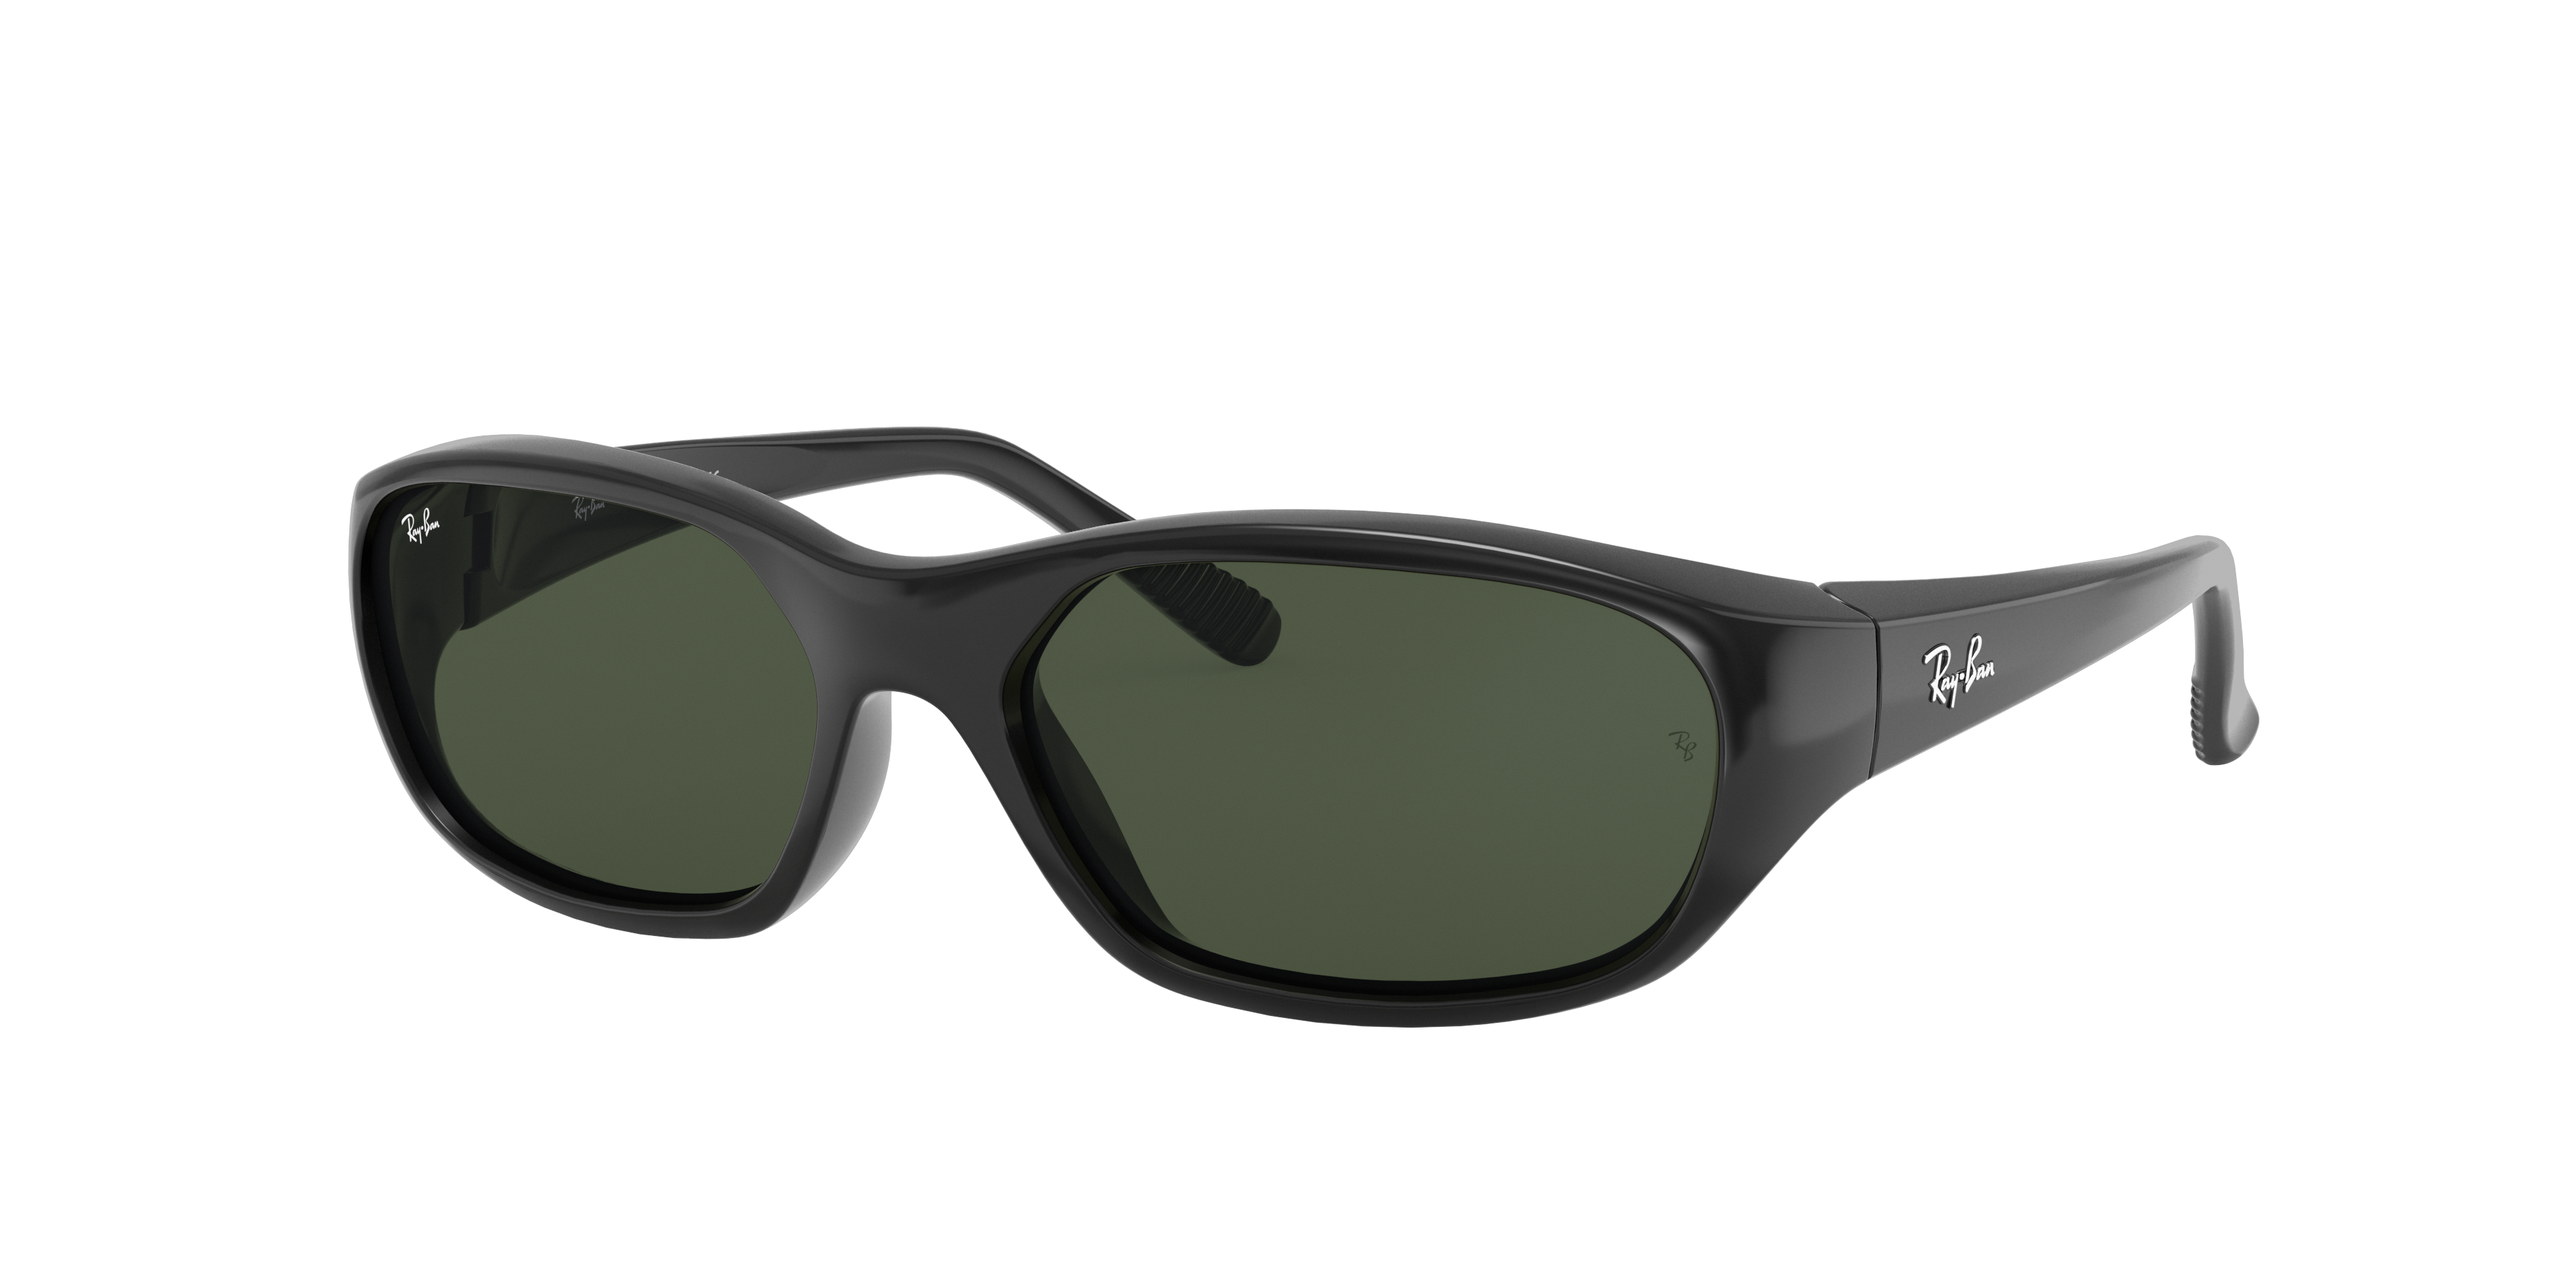 reservering intelligentie inzet Daddy-o Ii Sunglasses in Black and Green | Ray-Ban®